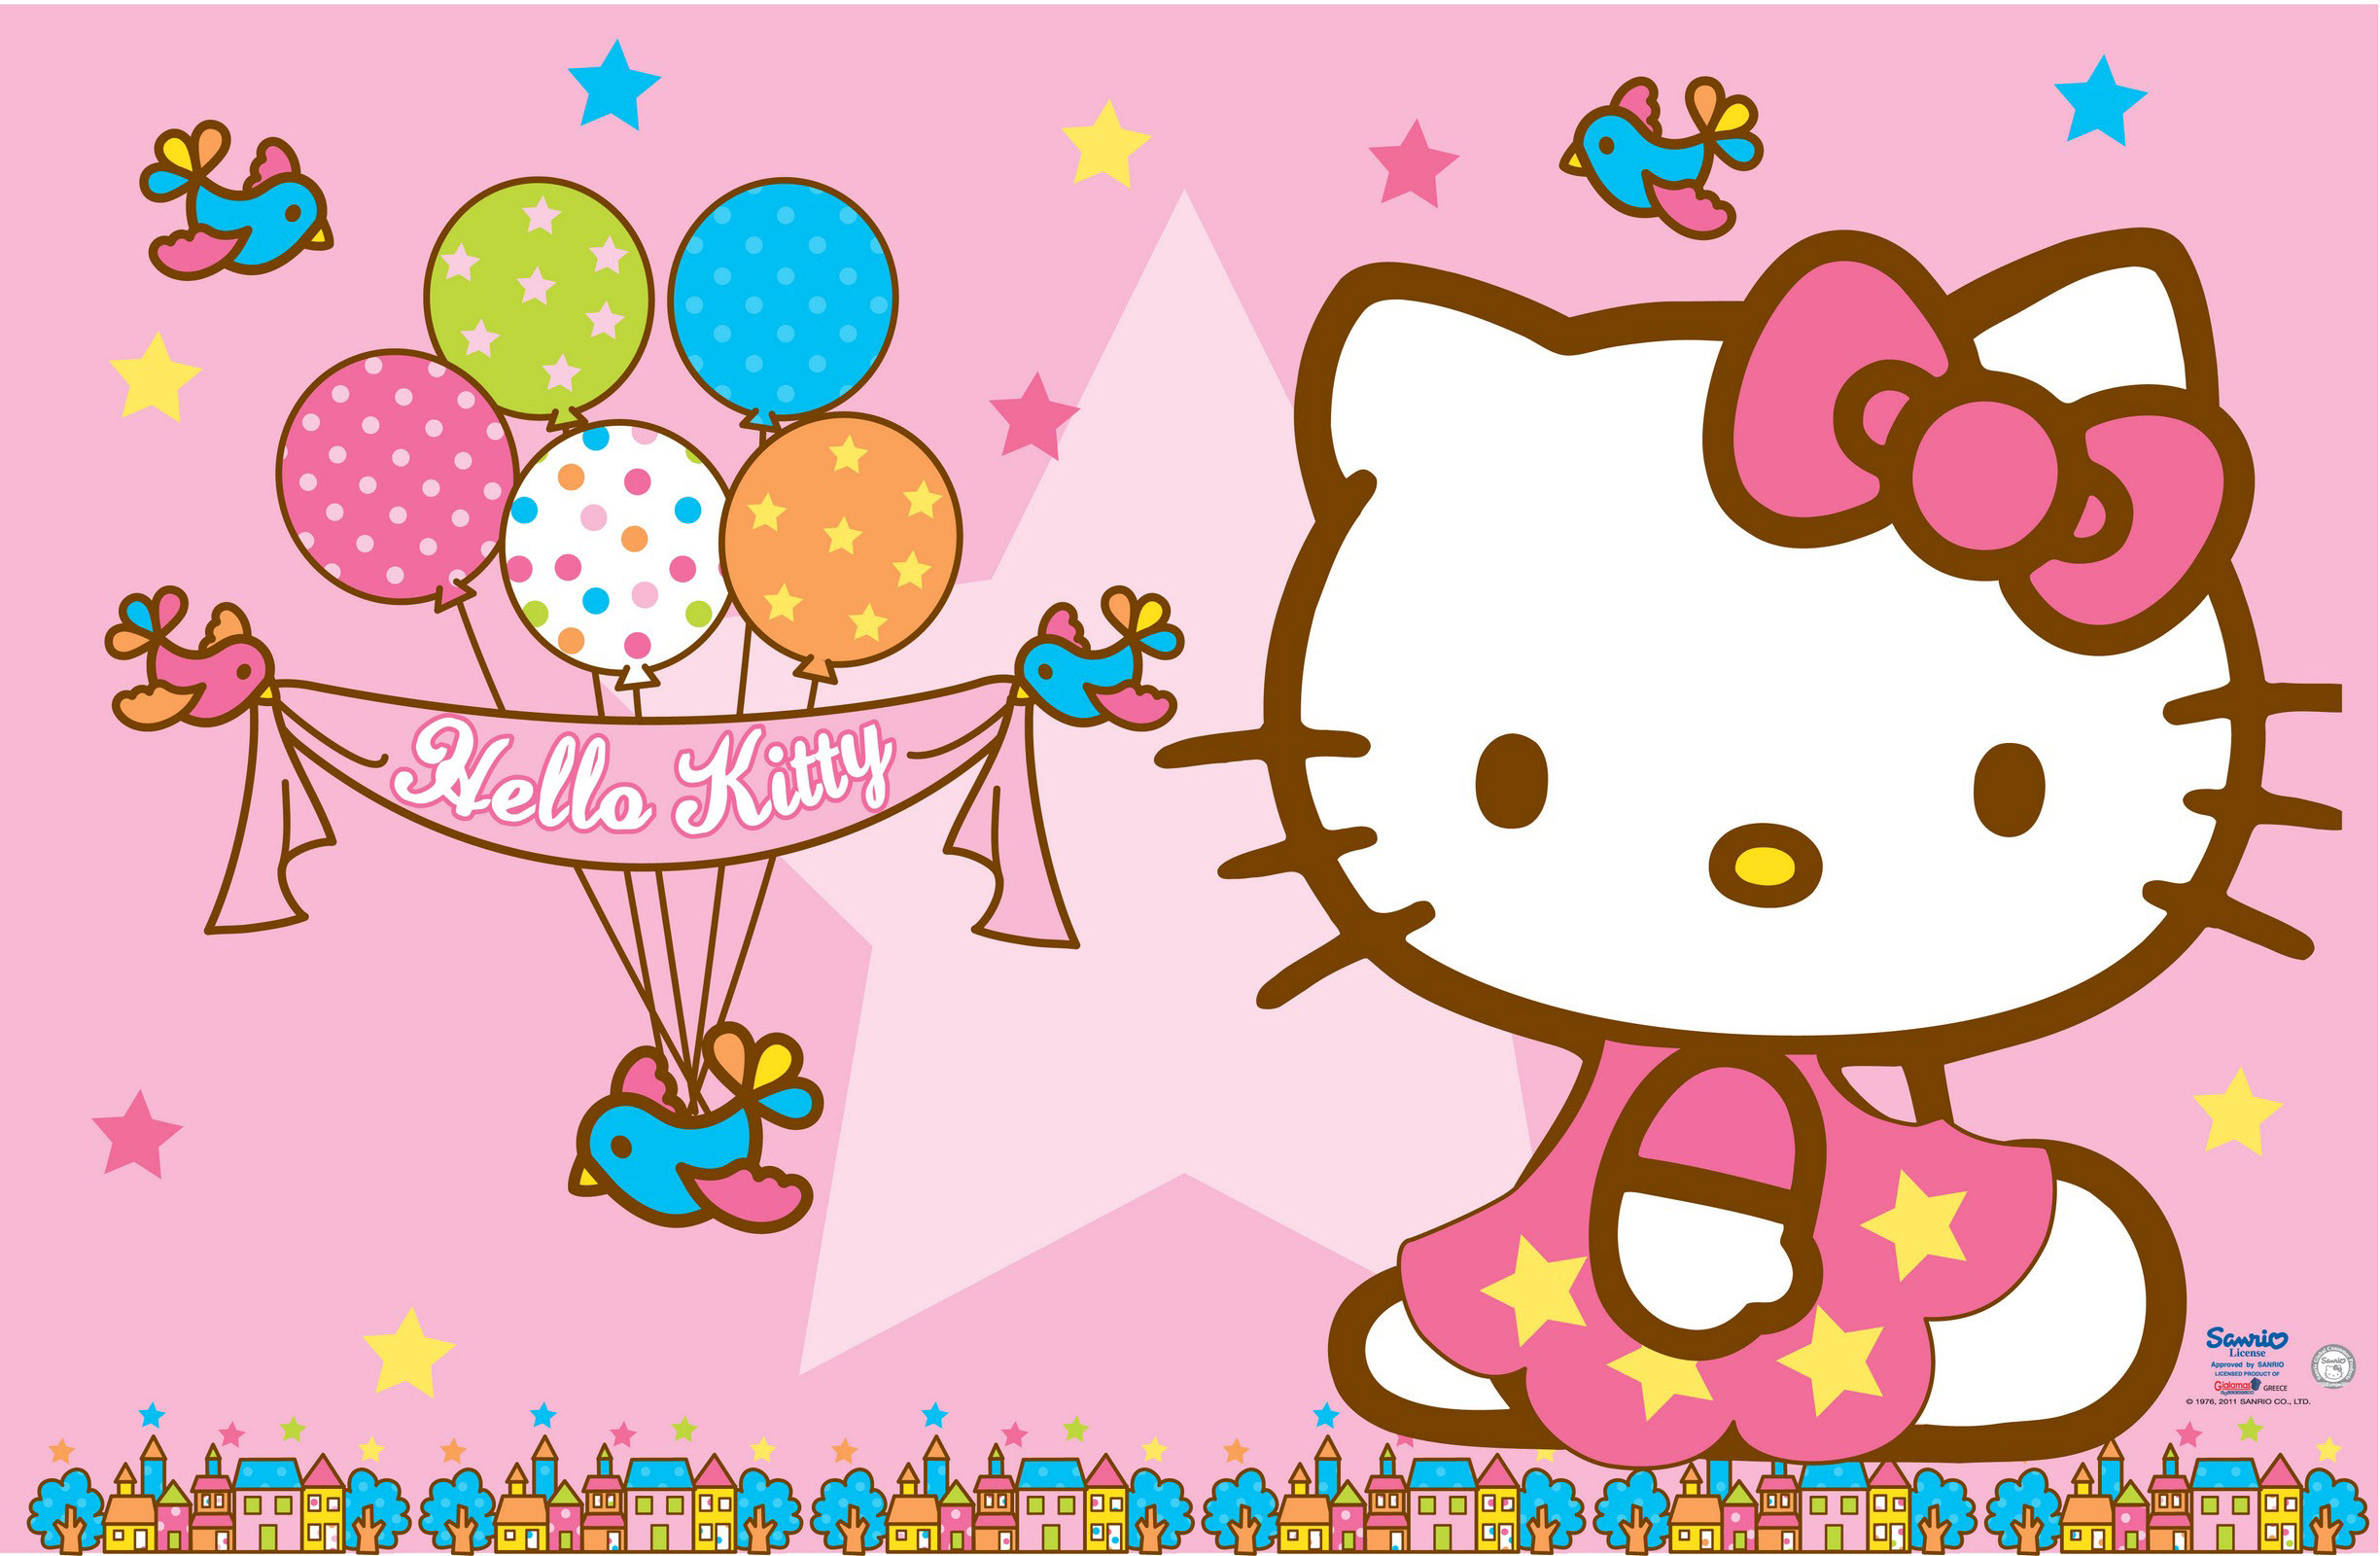 Hello Kitty Wallpaper   Pink Background and Balloons for Birthday